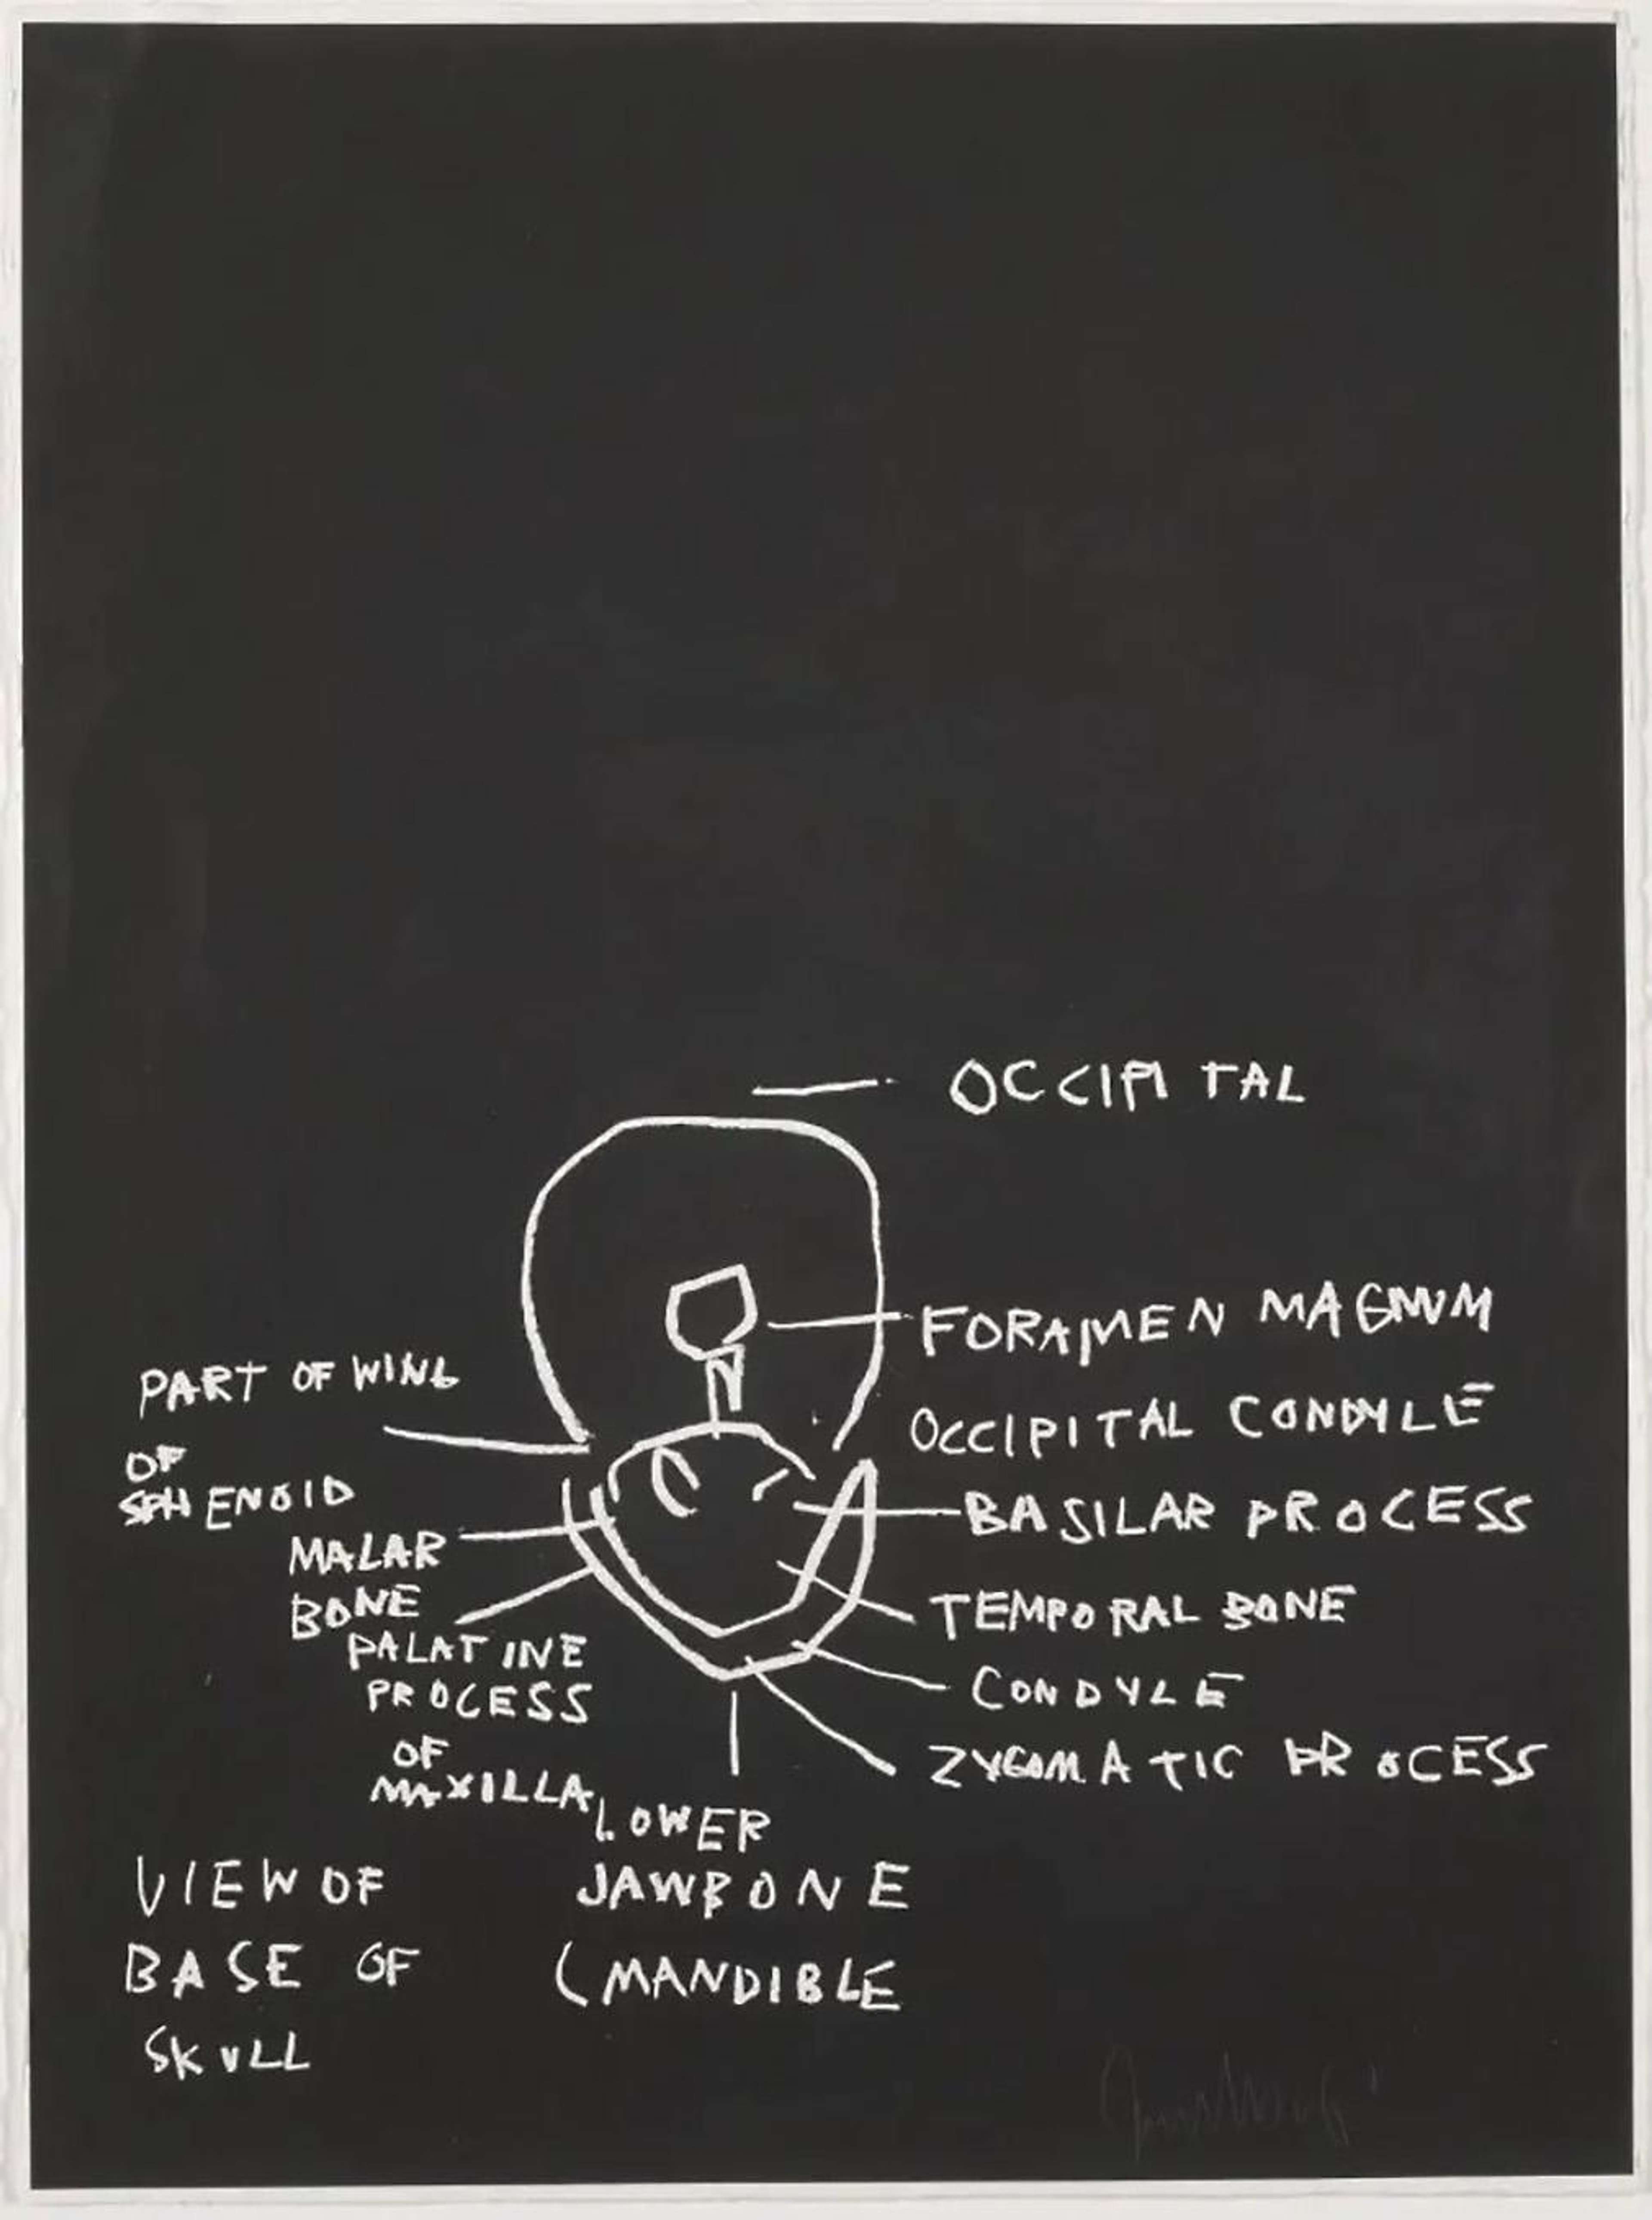 Jean-Michel Basquiat’s Anatomy, View Of Base Of Skull. A black screenprint featuring white anatomical drawings of the base of a human skull with descriptive labels.